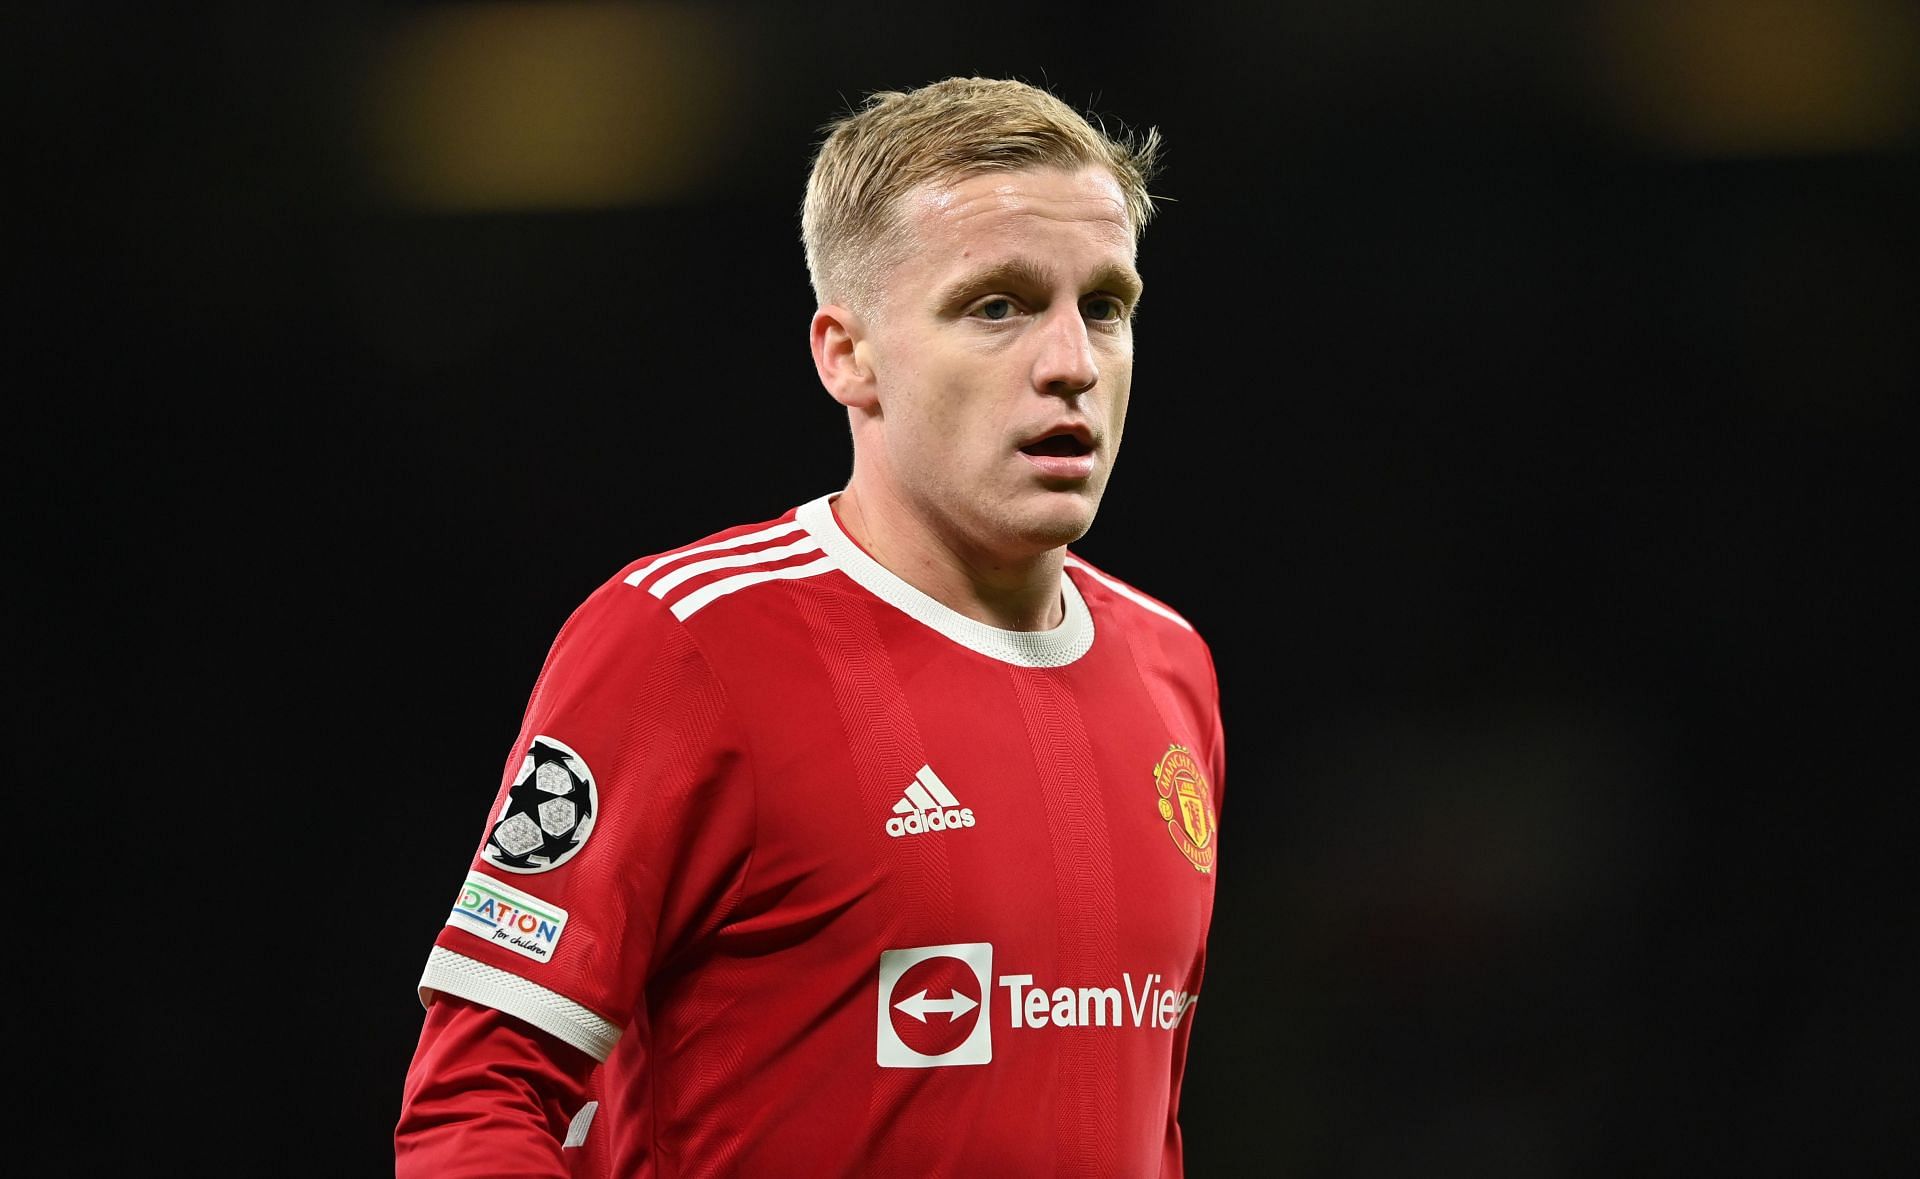 Crystal Palace have submitted an offer to take Donny van de Beek on loan this month.